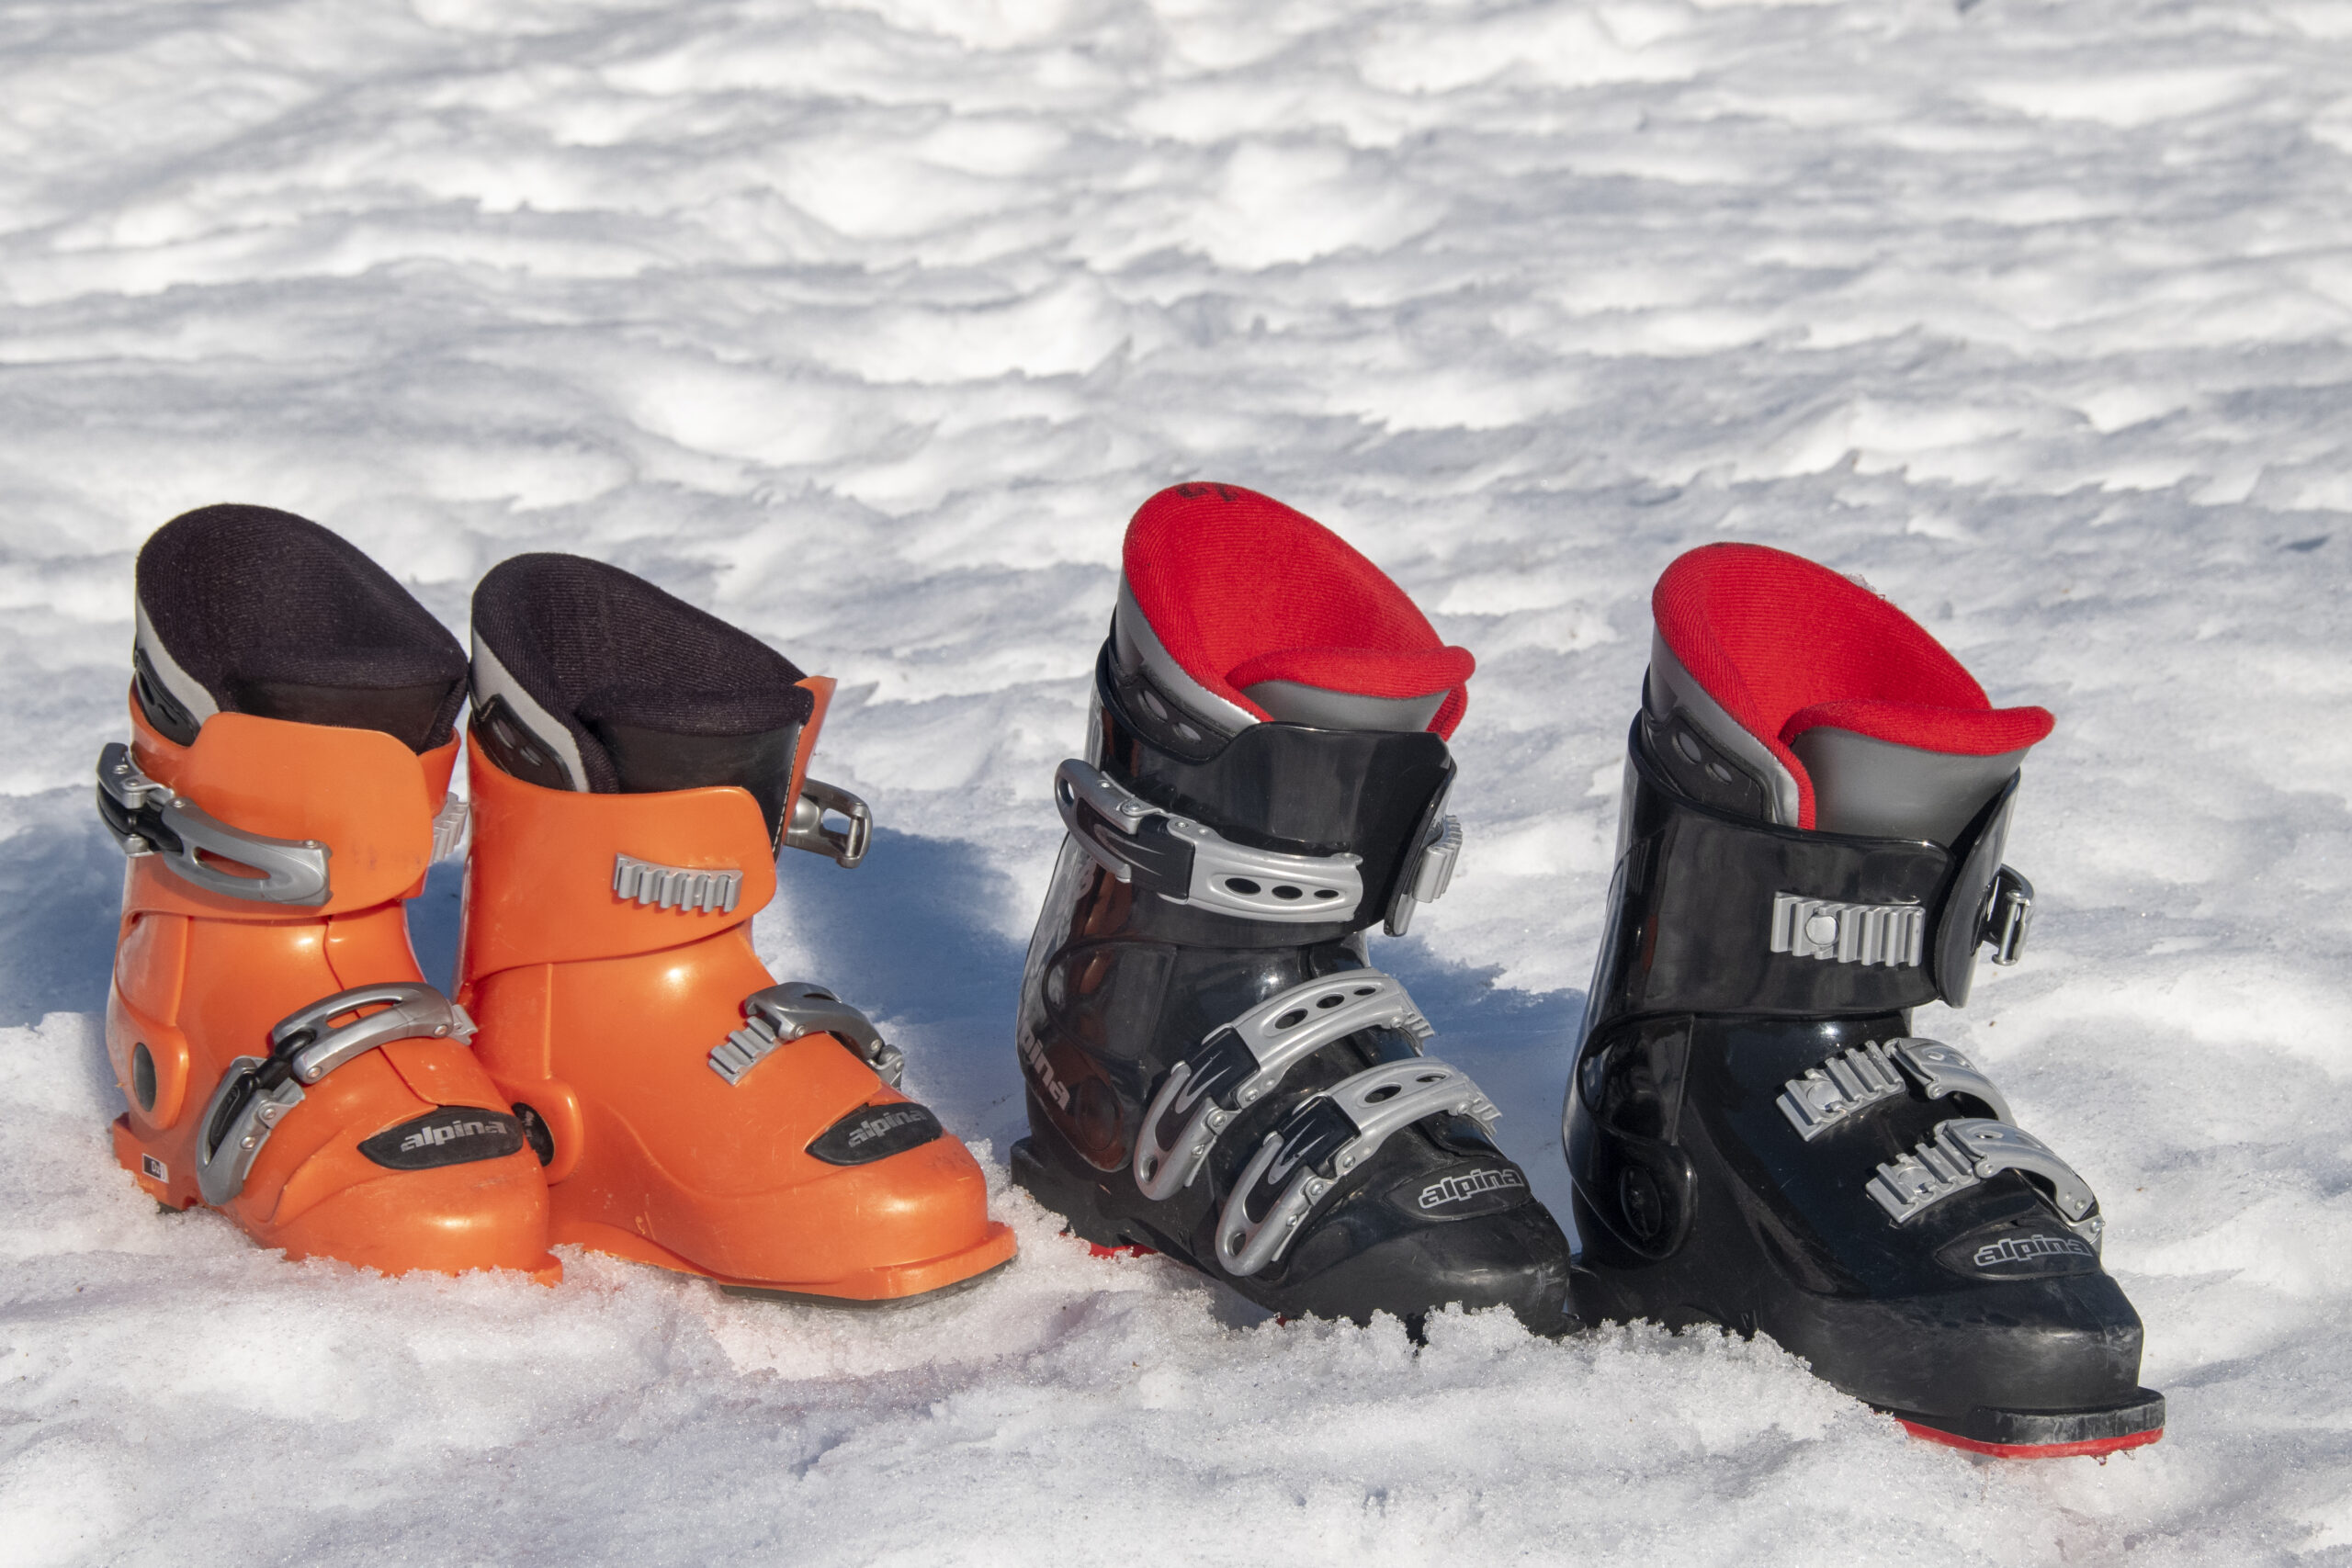 Children's alpine boots for skiing for rental.